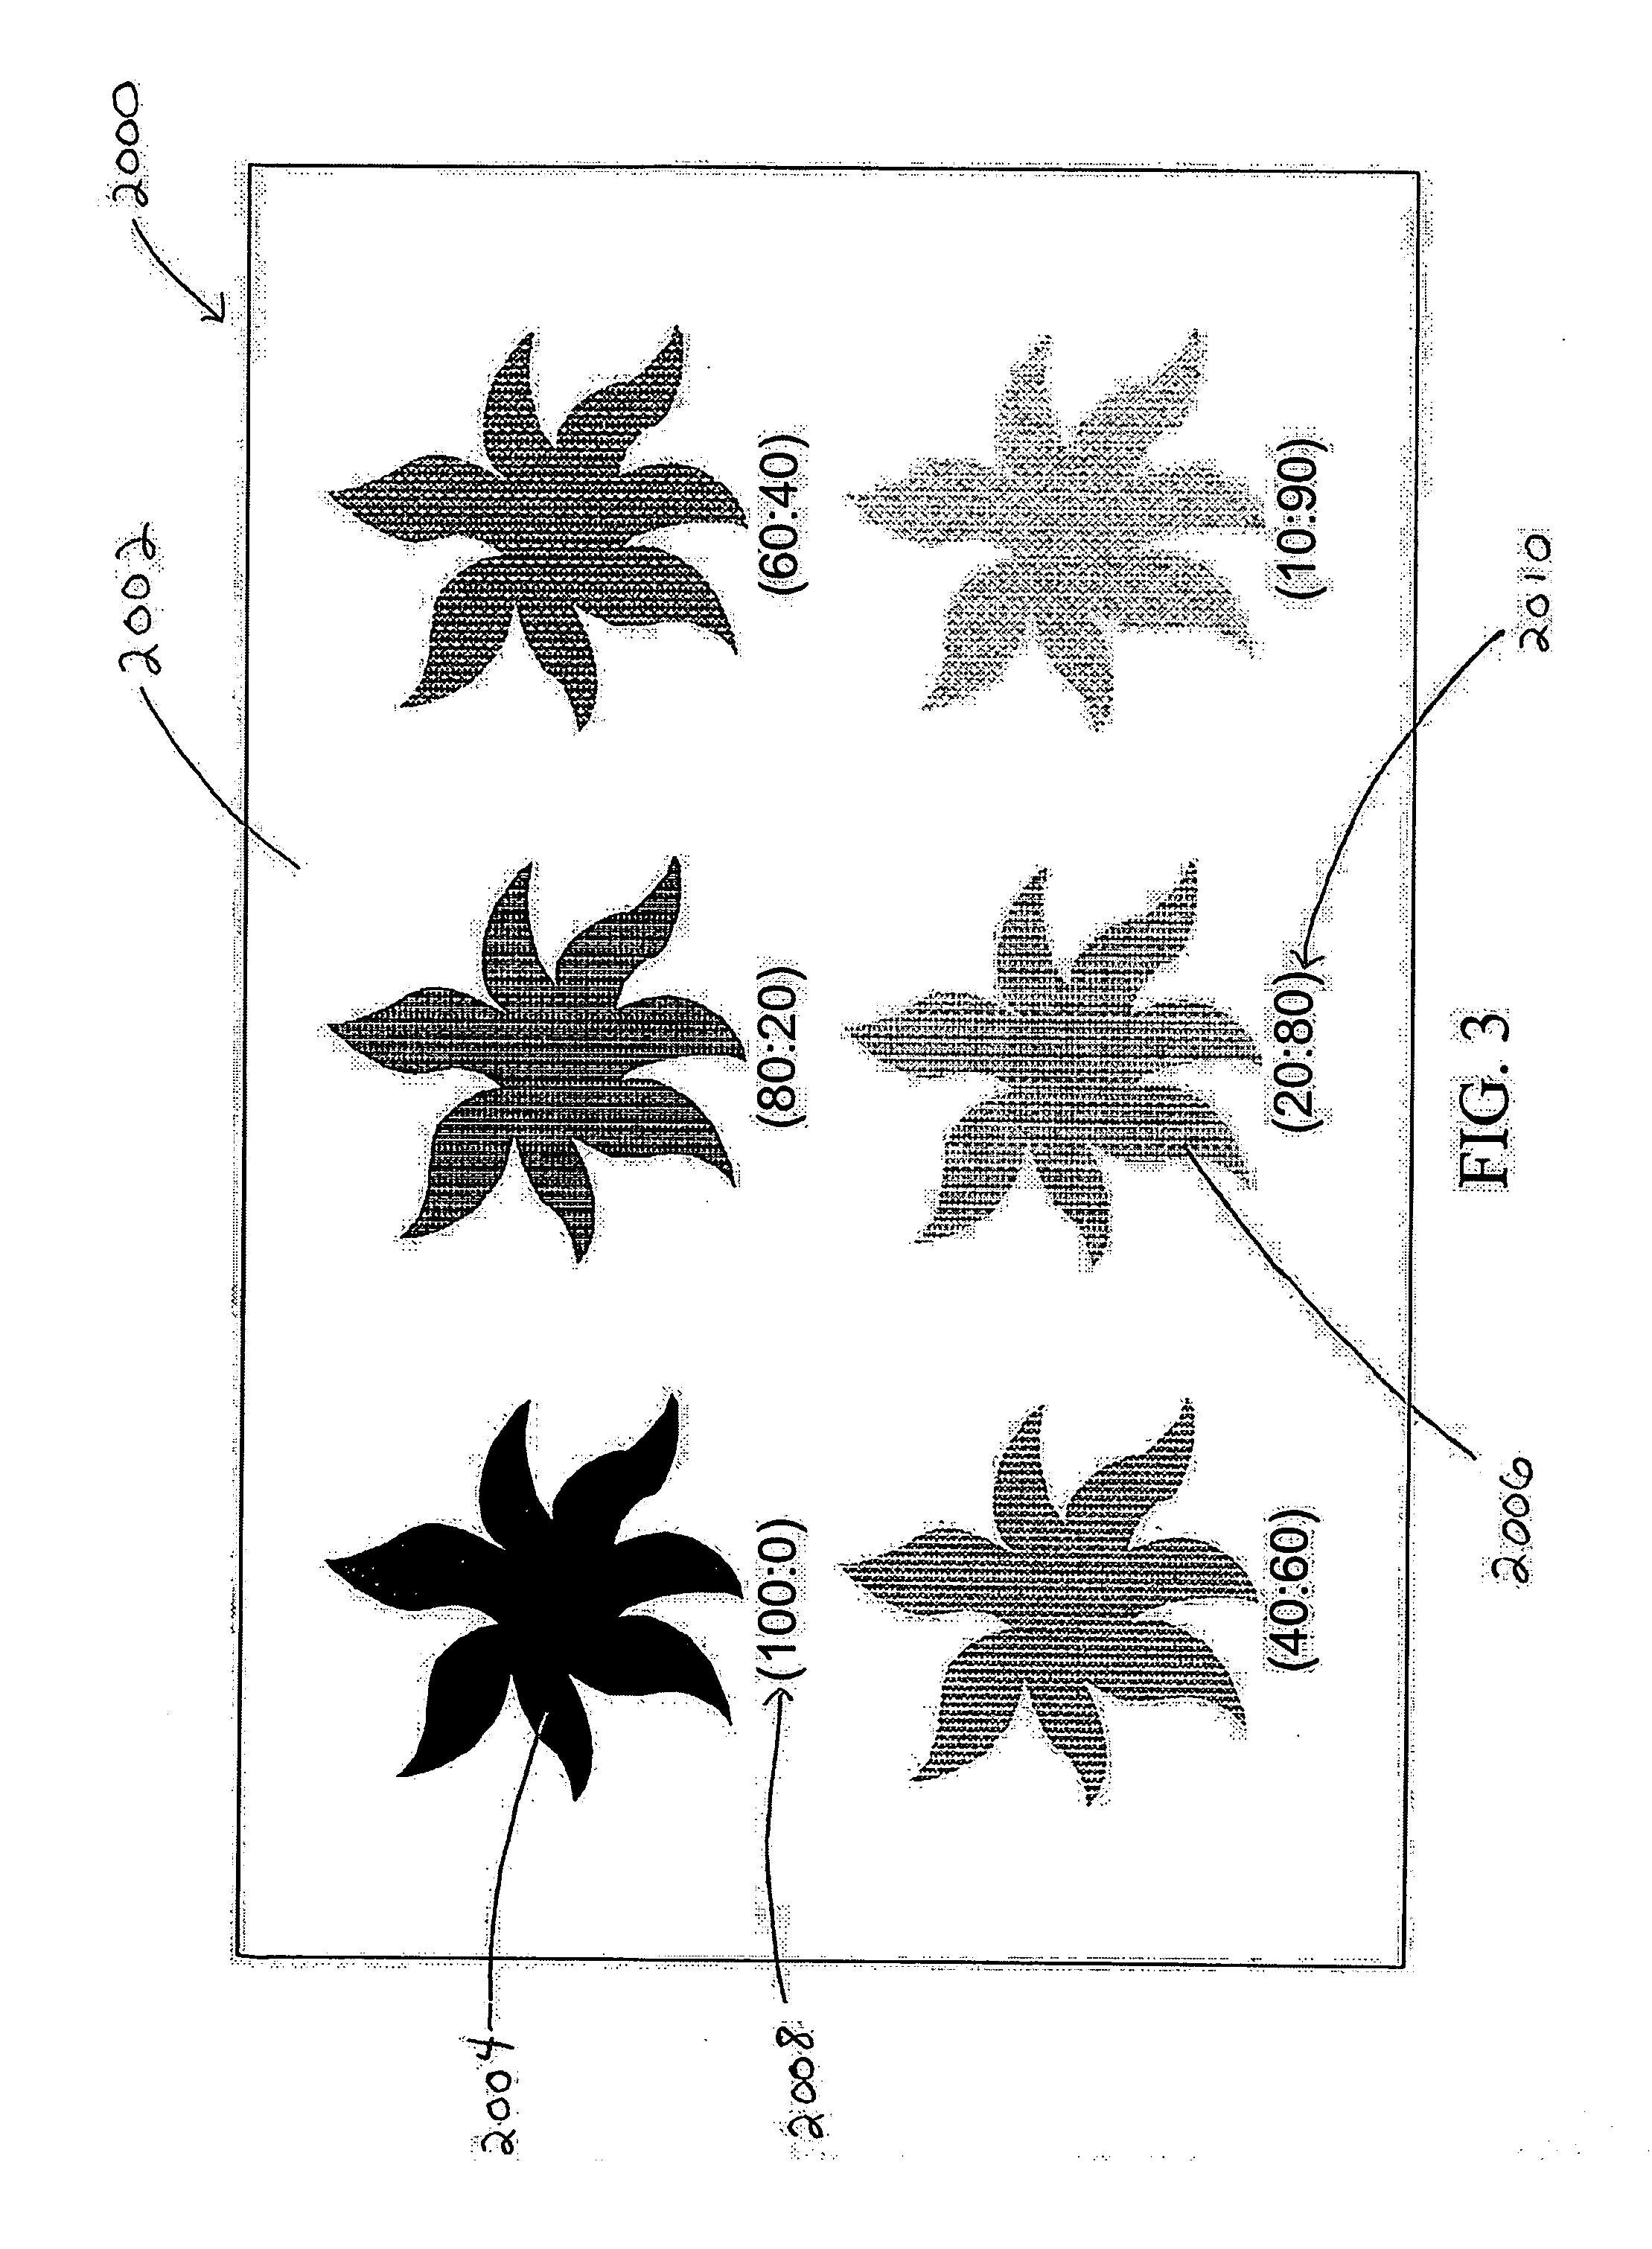 Method of neutralizing a stain on a surface